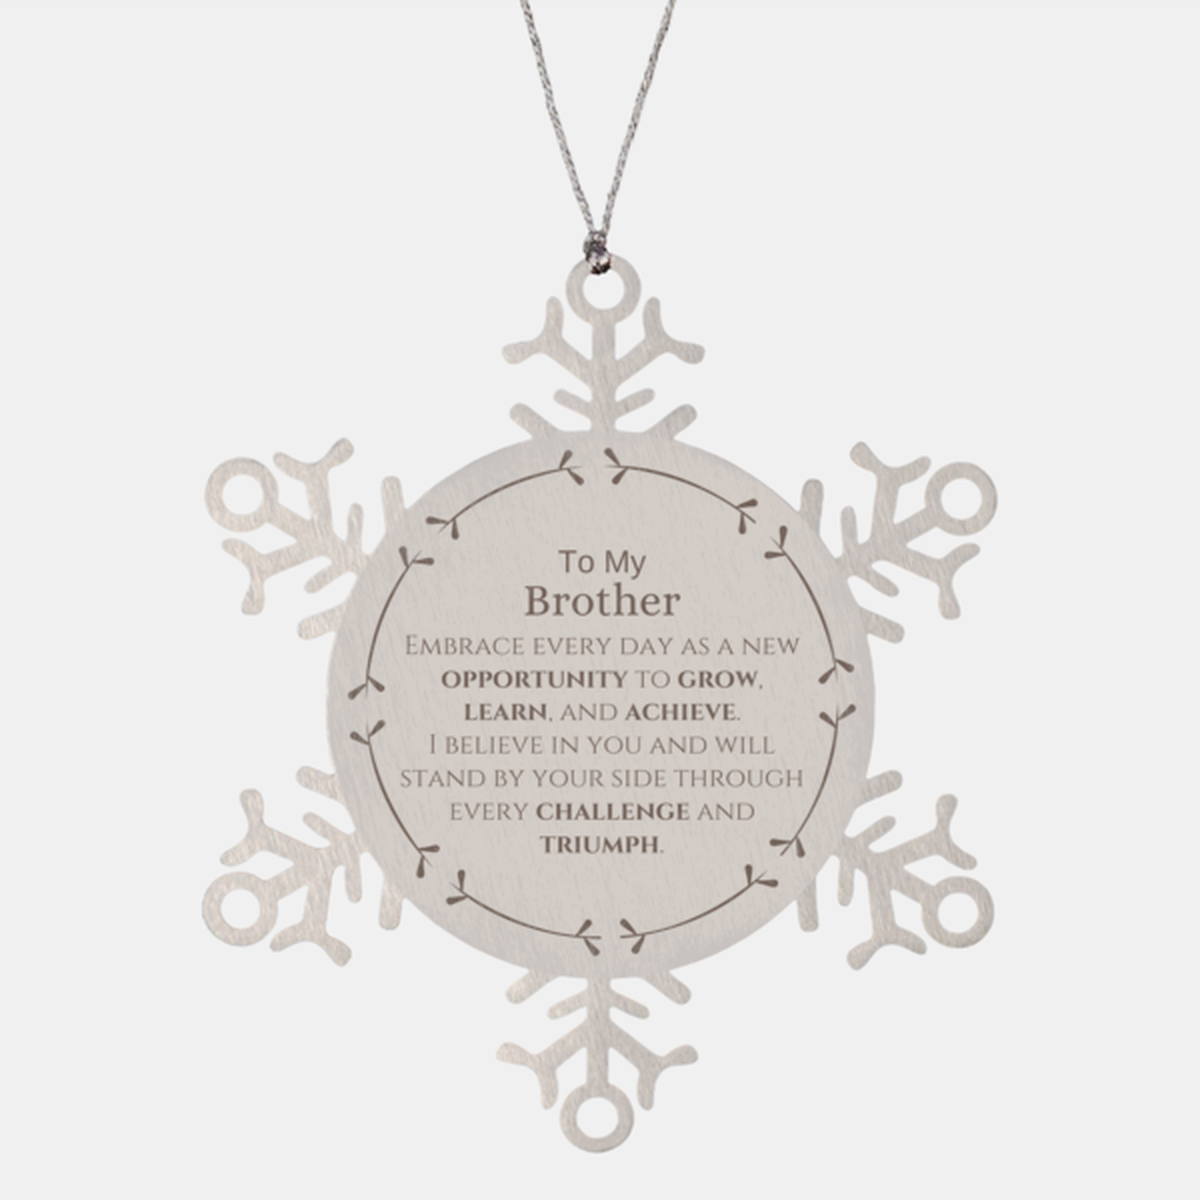 To My Brother Gifts, I believe in you and will stand by your side, Inspirational Snowflake Ornament For Brother, Birthday Christmas Motivational Brother Gifts